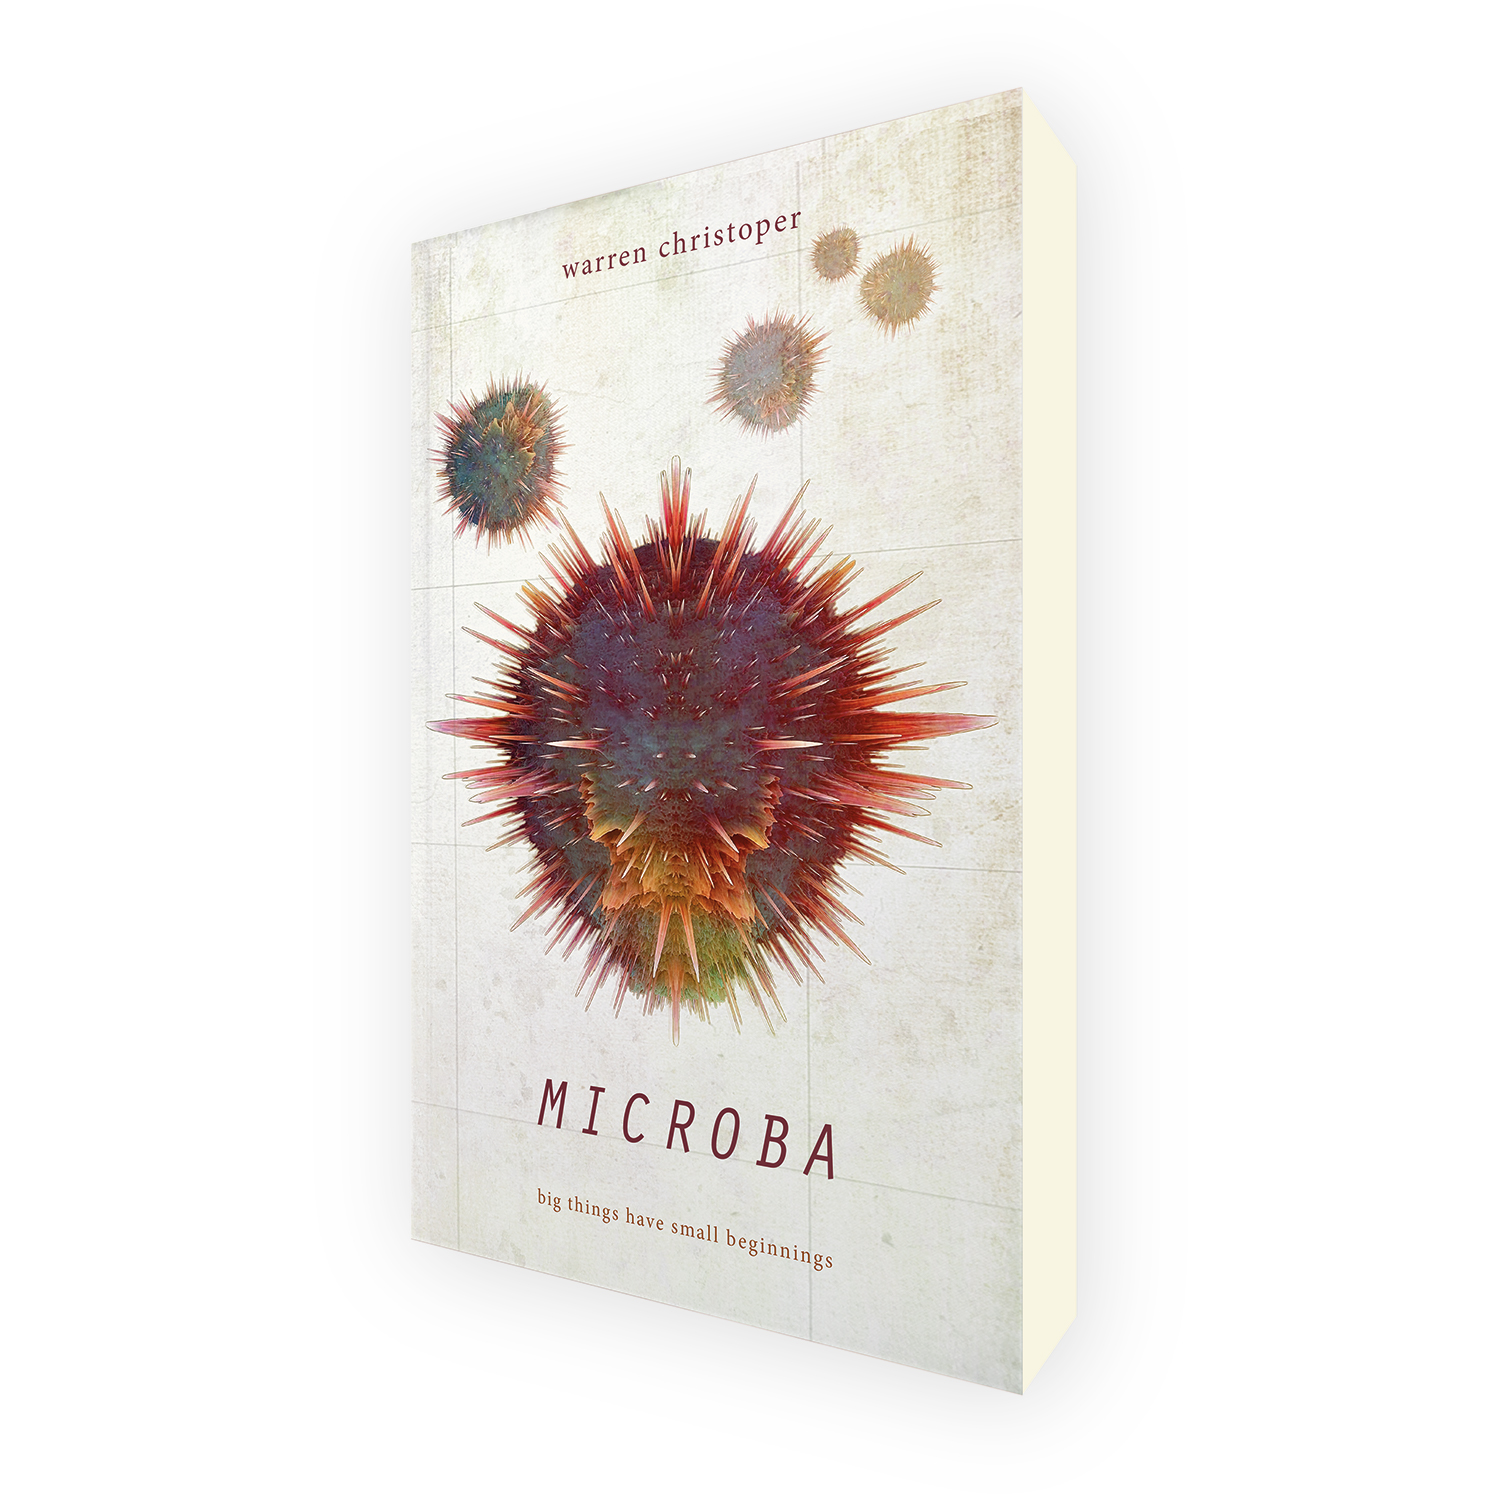 'Microba' is a bespoke cover design for a modern scifi thriller novel. The book cover was designed by Mark Thomas, of coverness.com. To find out more about my book design services, please visit www.coverness.com.